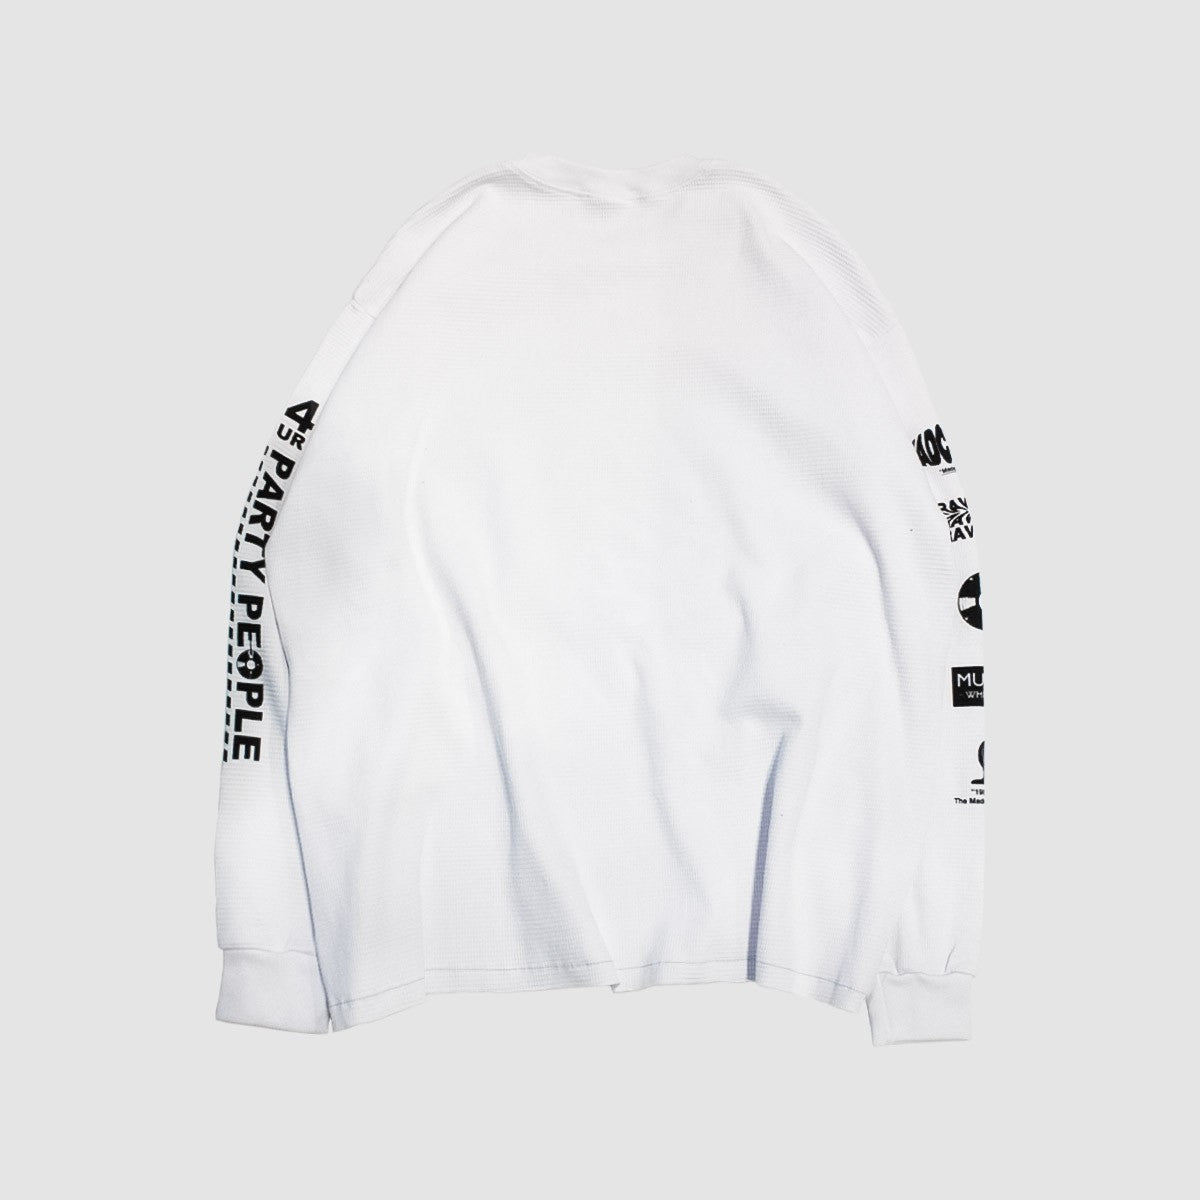 MUZE BLACK LABEL - 24HOUR PARTY PEOPLE THERMAL L/S TEE(WHITE)ミューズ サーマル ロング スリーブ Tシャツ ホワイト